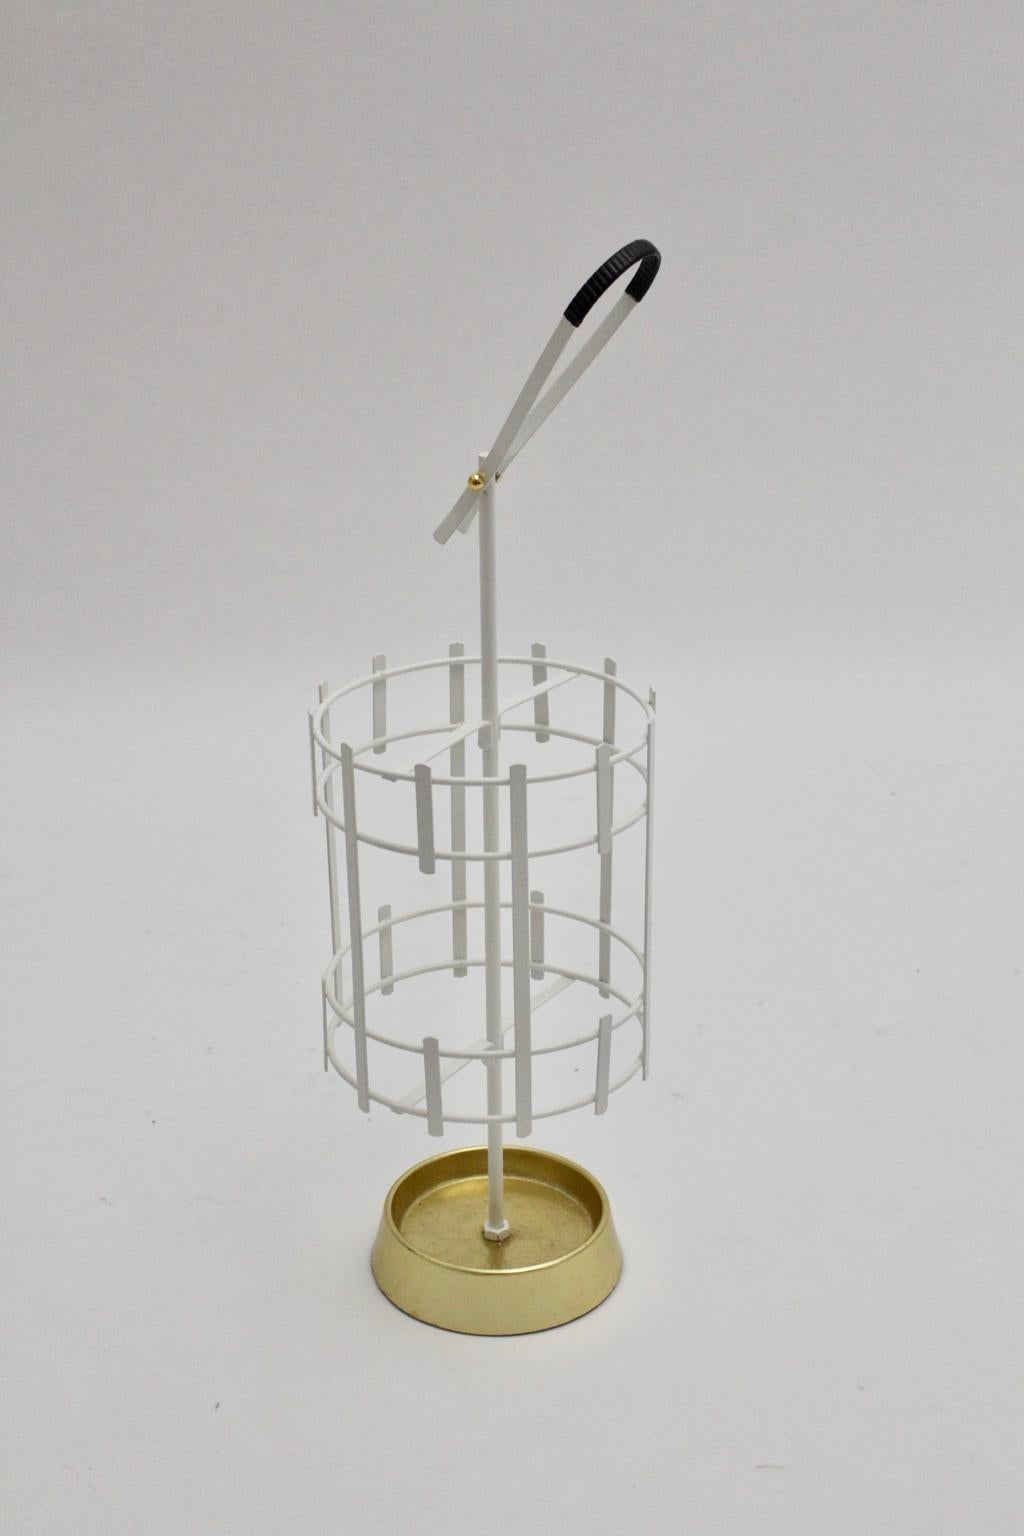 The stunning mid century modern vintage umbrella stand from the 1950s was made of white lacquered metal basket, brass fittings and cast iron. Also the umbrella stand was carefully cleaned and the metal basket is newly lacquered, so the vintage